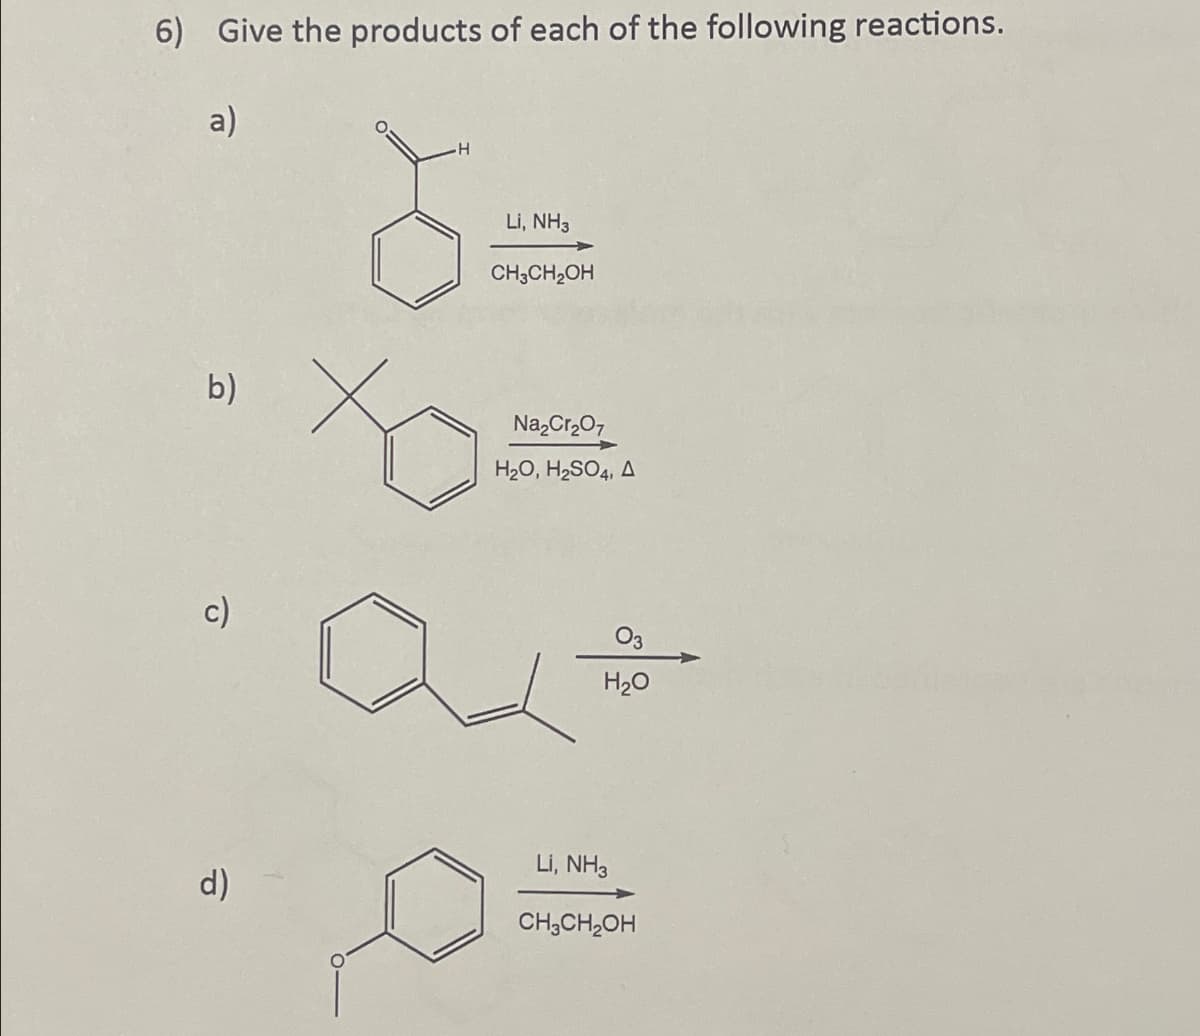 6) Give the products of each of the following reactions.
a)
b)
d)
H
Li, NH3
CH3CH₂OH
xo
Na₂Cr₂O7
H₂O, H₂SO4, A
H₂O
LI, NH3
CH₂CH₂OH